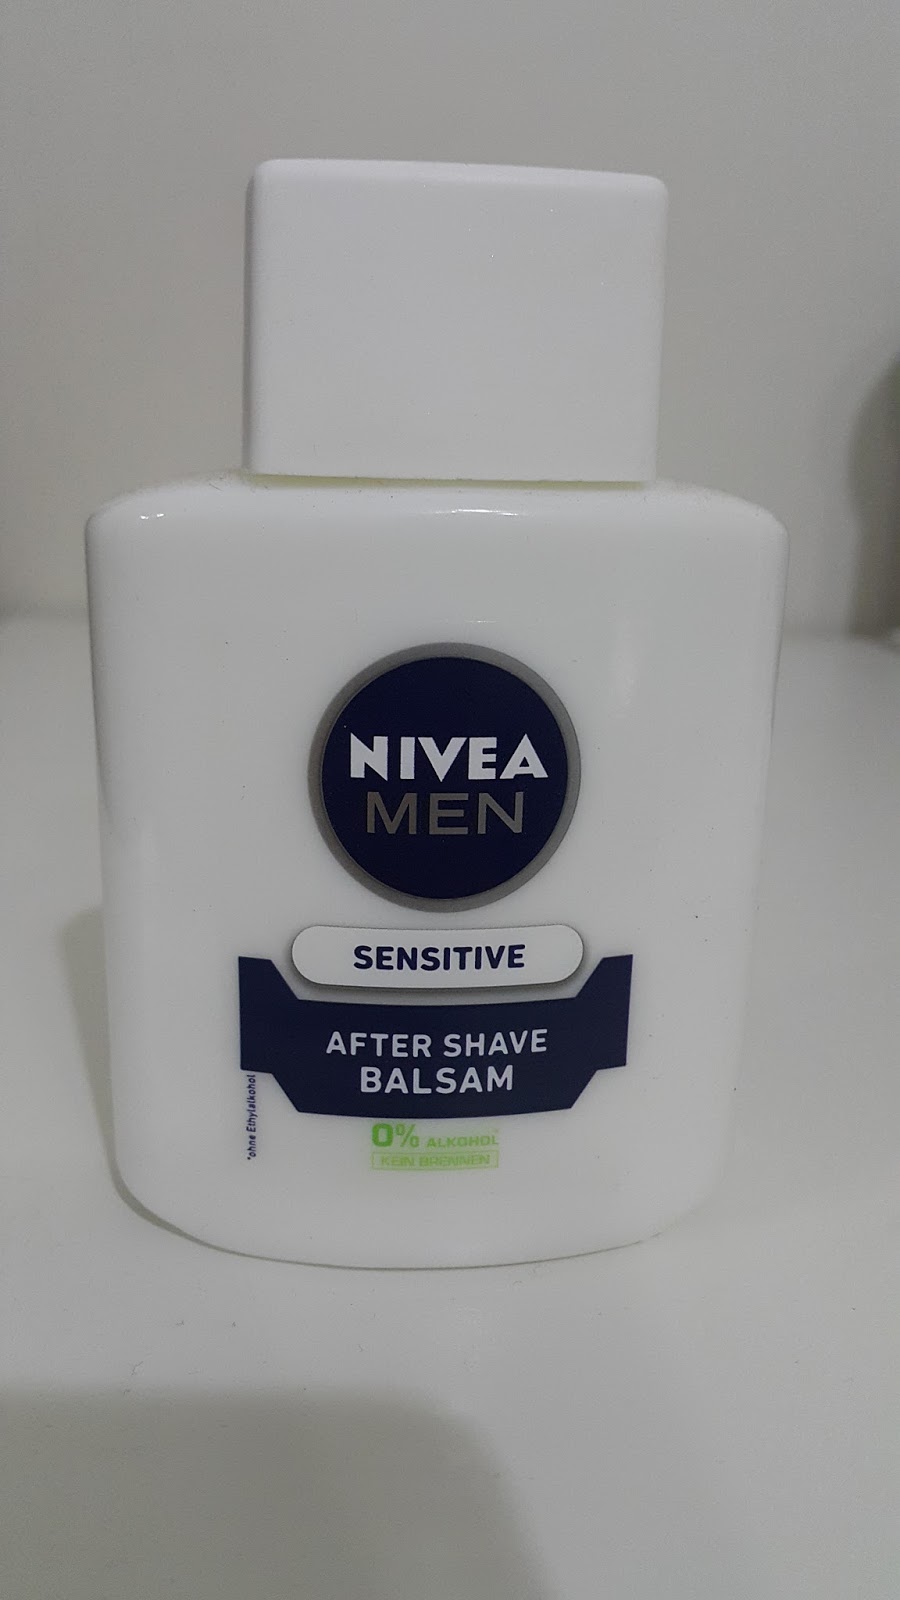 After Shave Balm Faberlic. Акко мен after Shave Balm. Бальзам nivea men